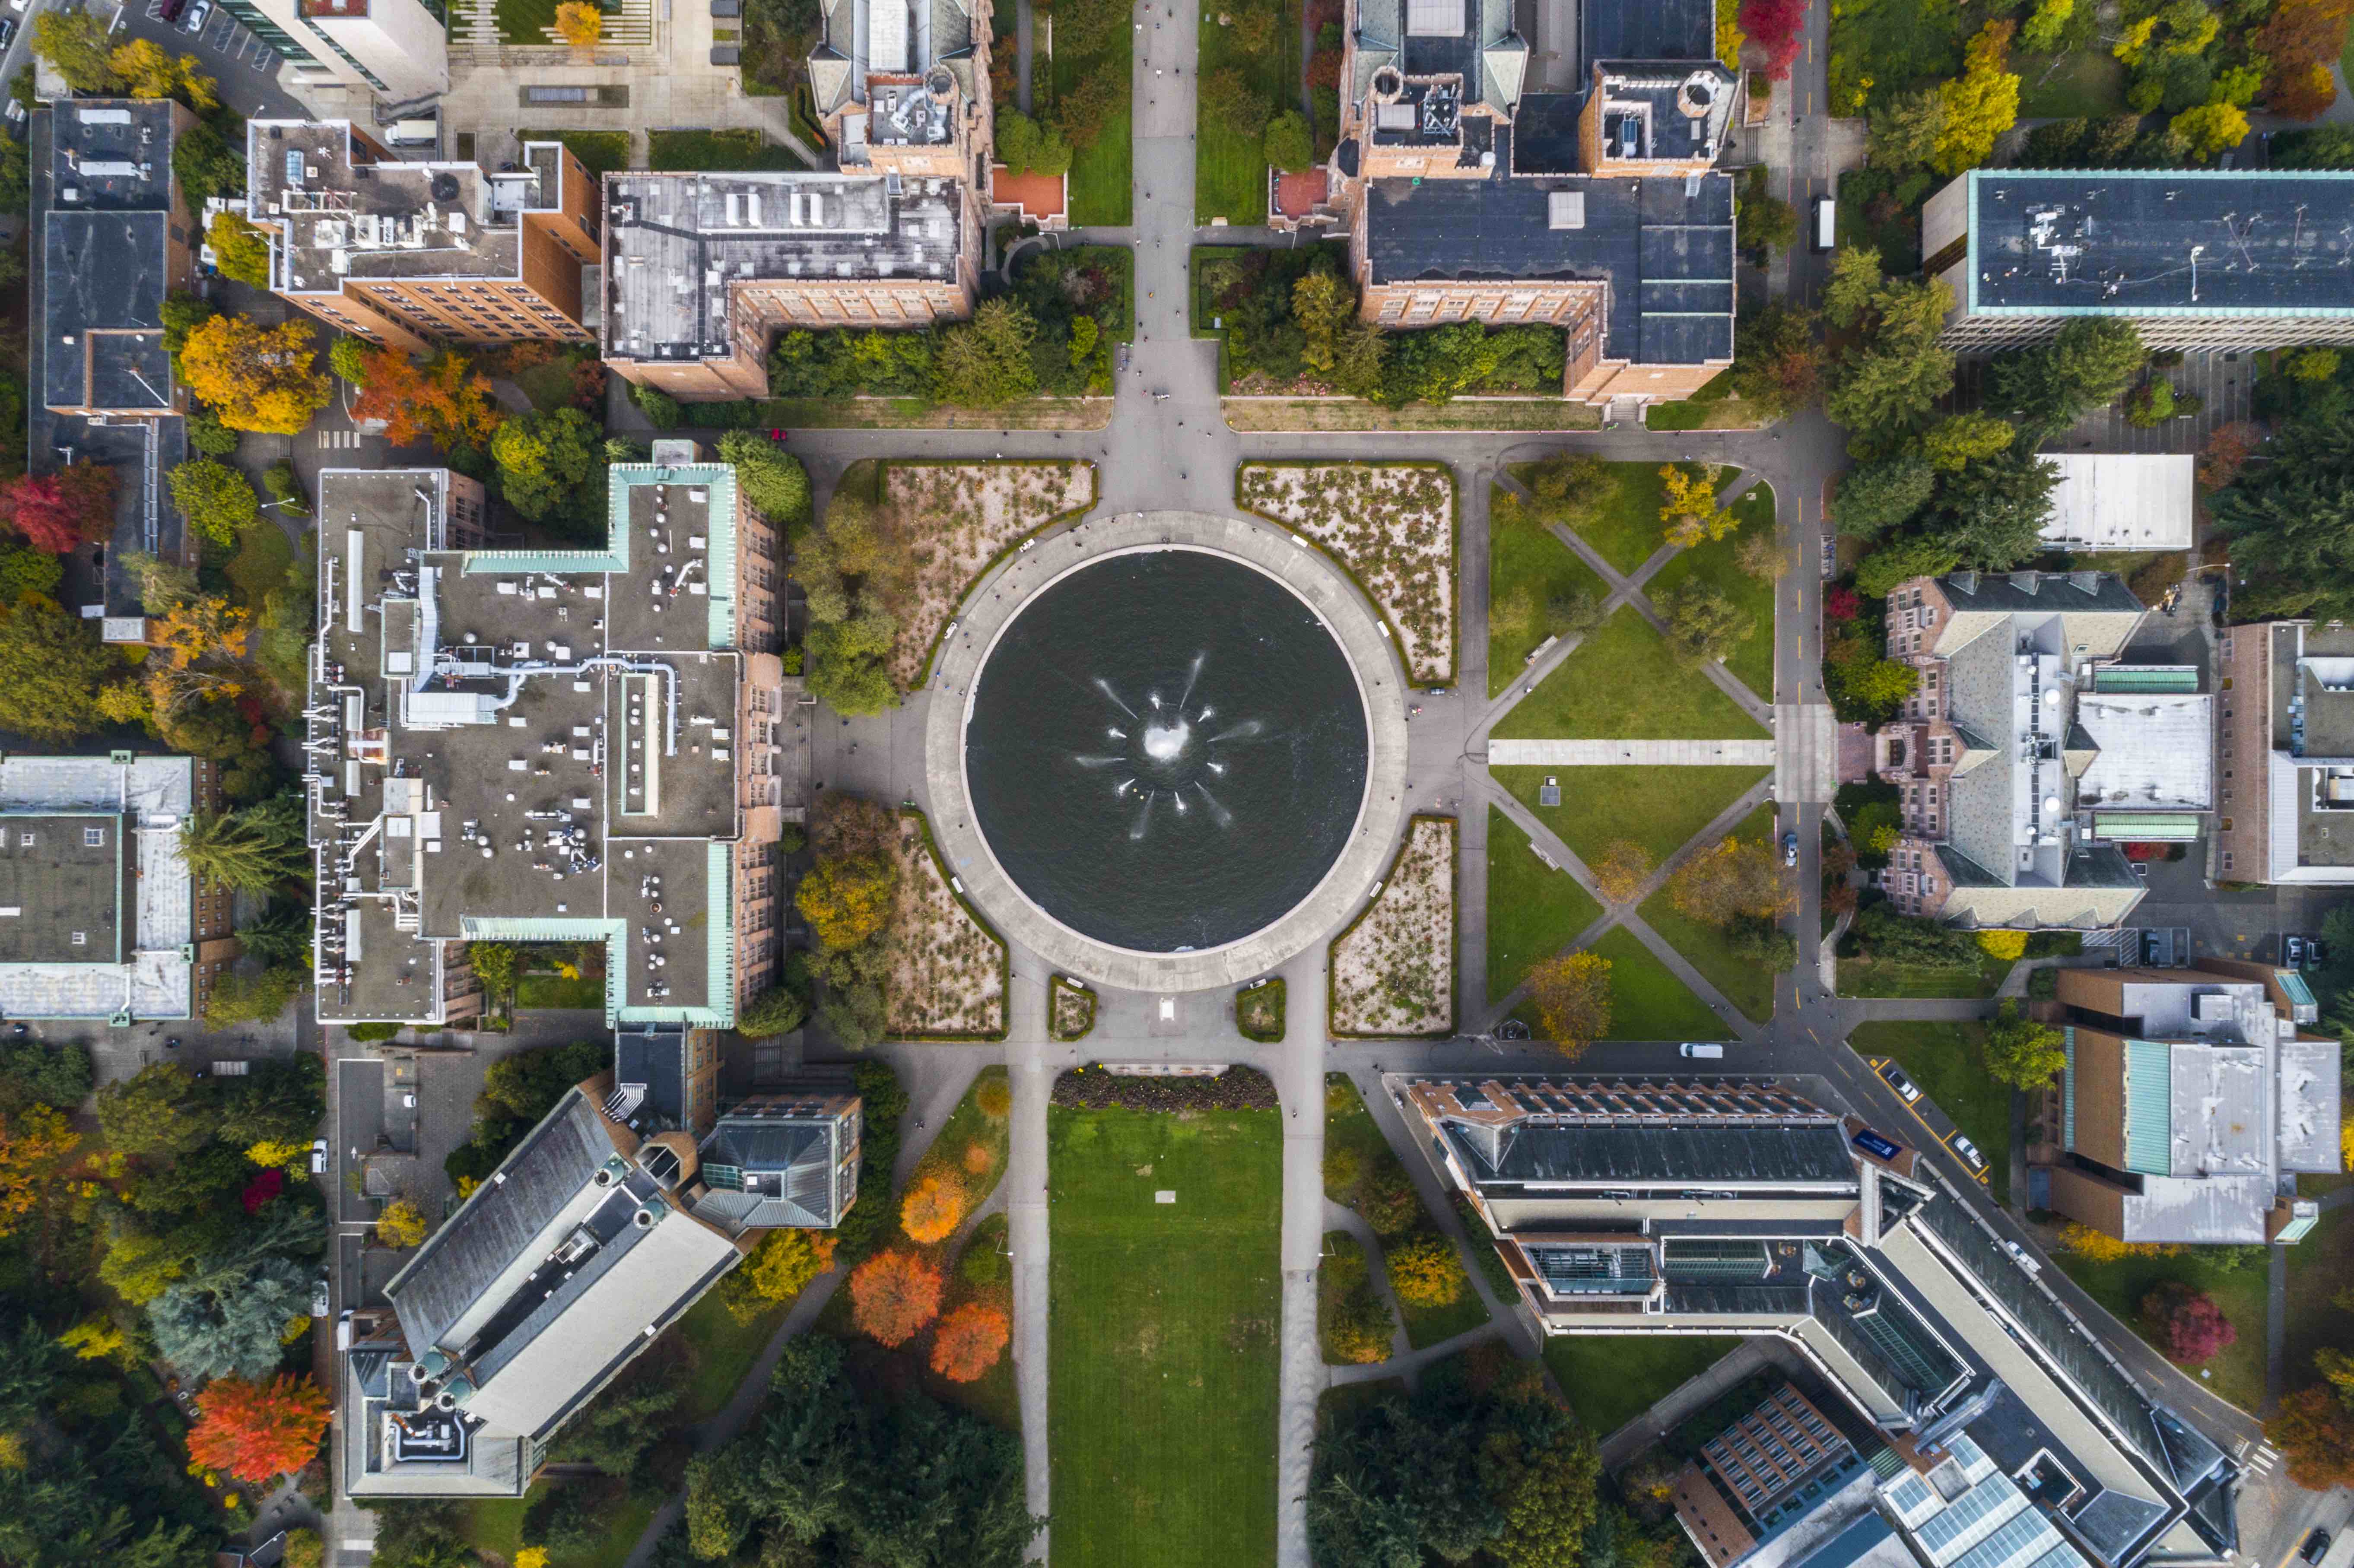 An arial view of the Univeristy of Washington featuring Drumheller Fountain in the center